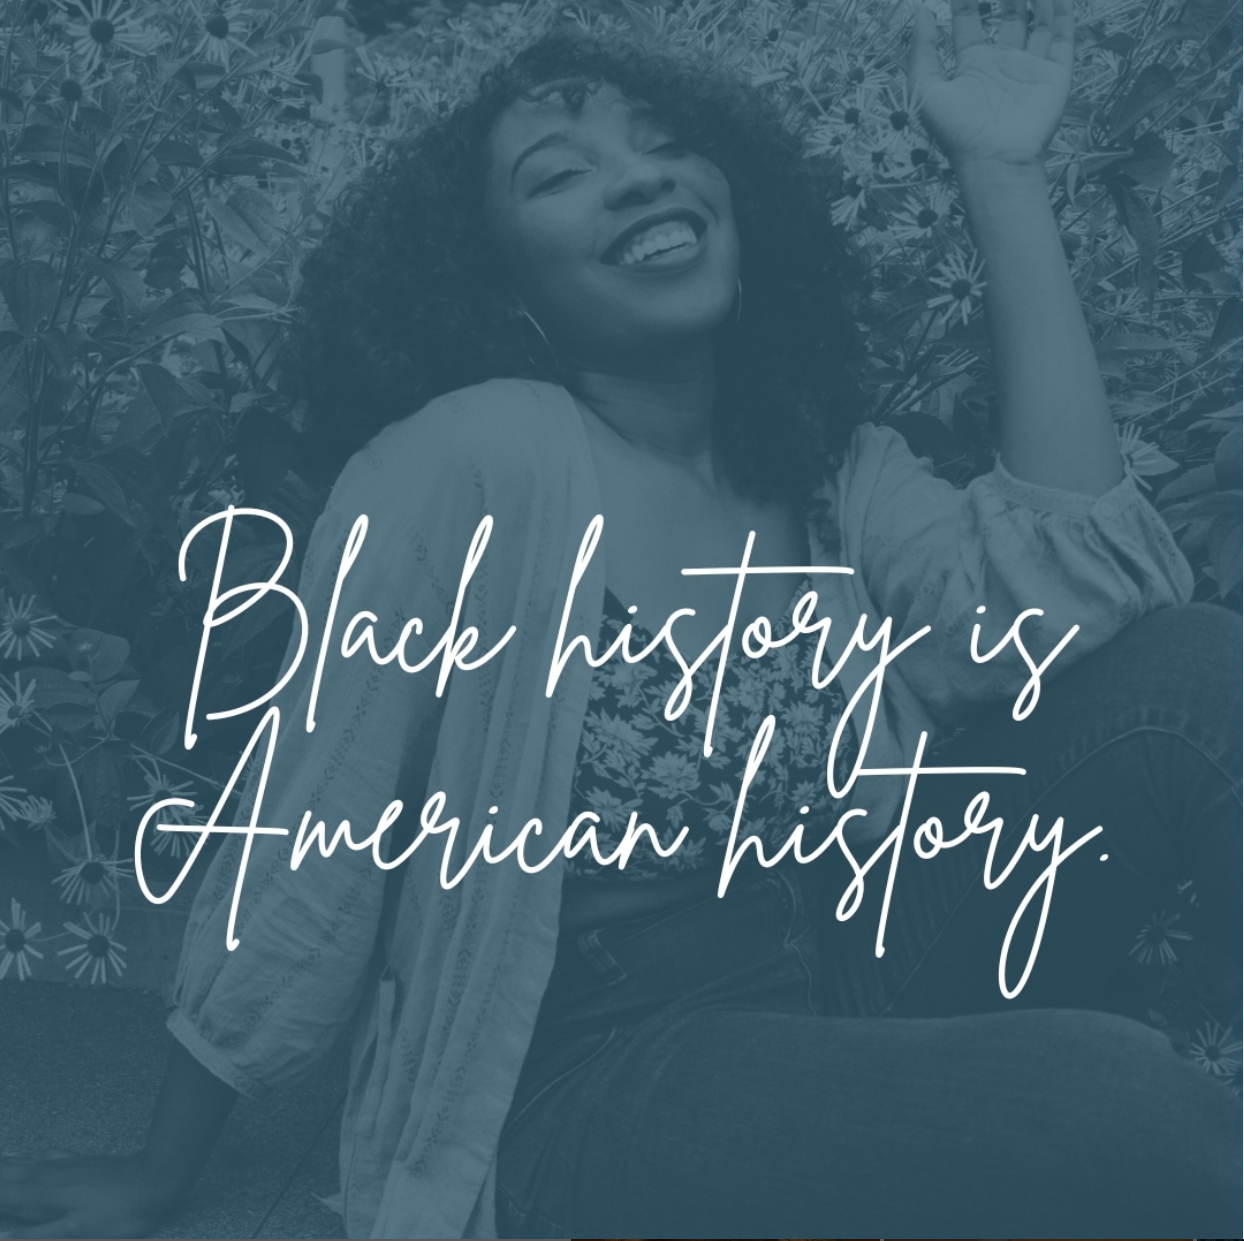 This month and every month, Scottsdale celebrates the history, stories and contributions of black Americans.